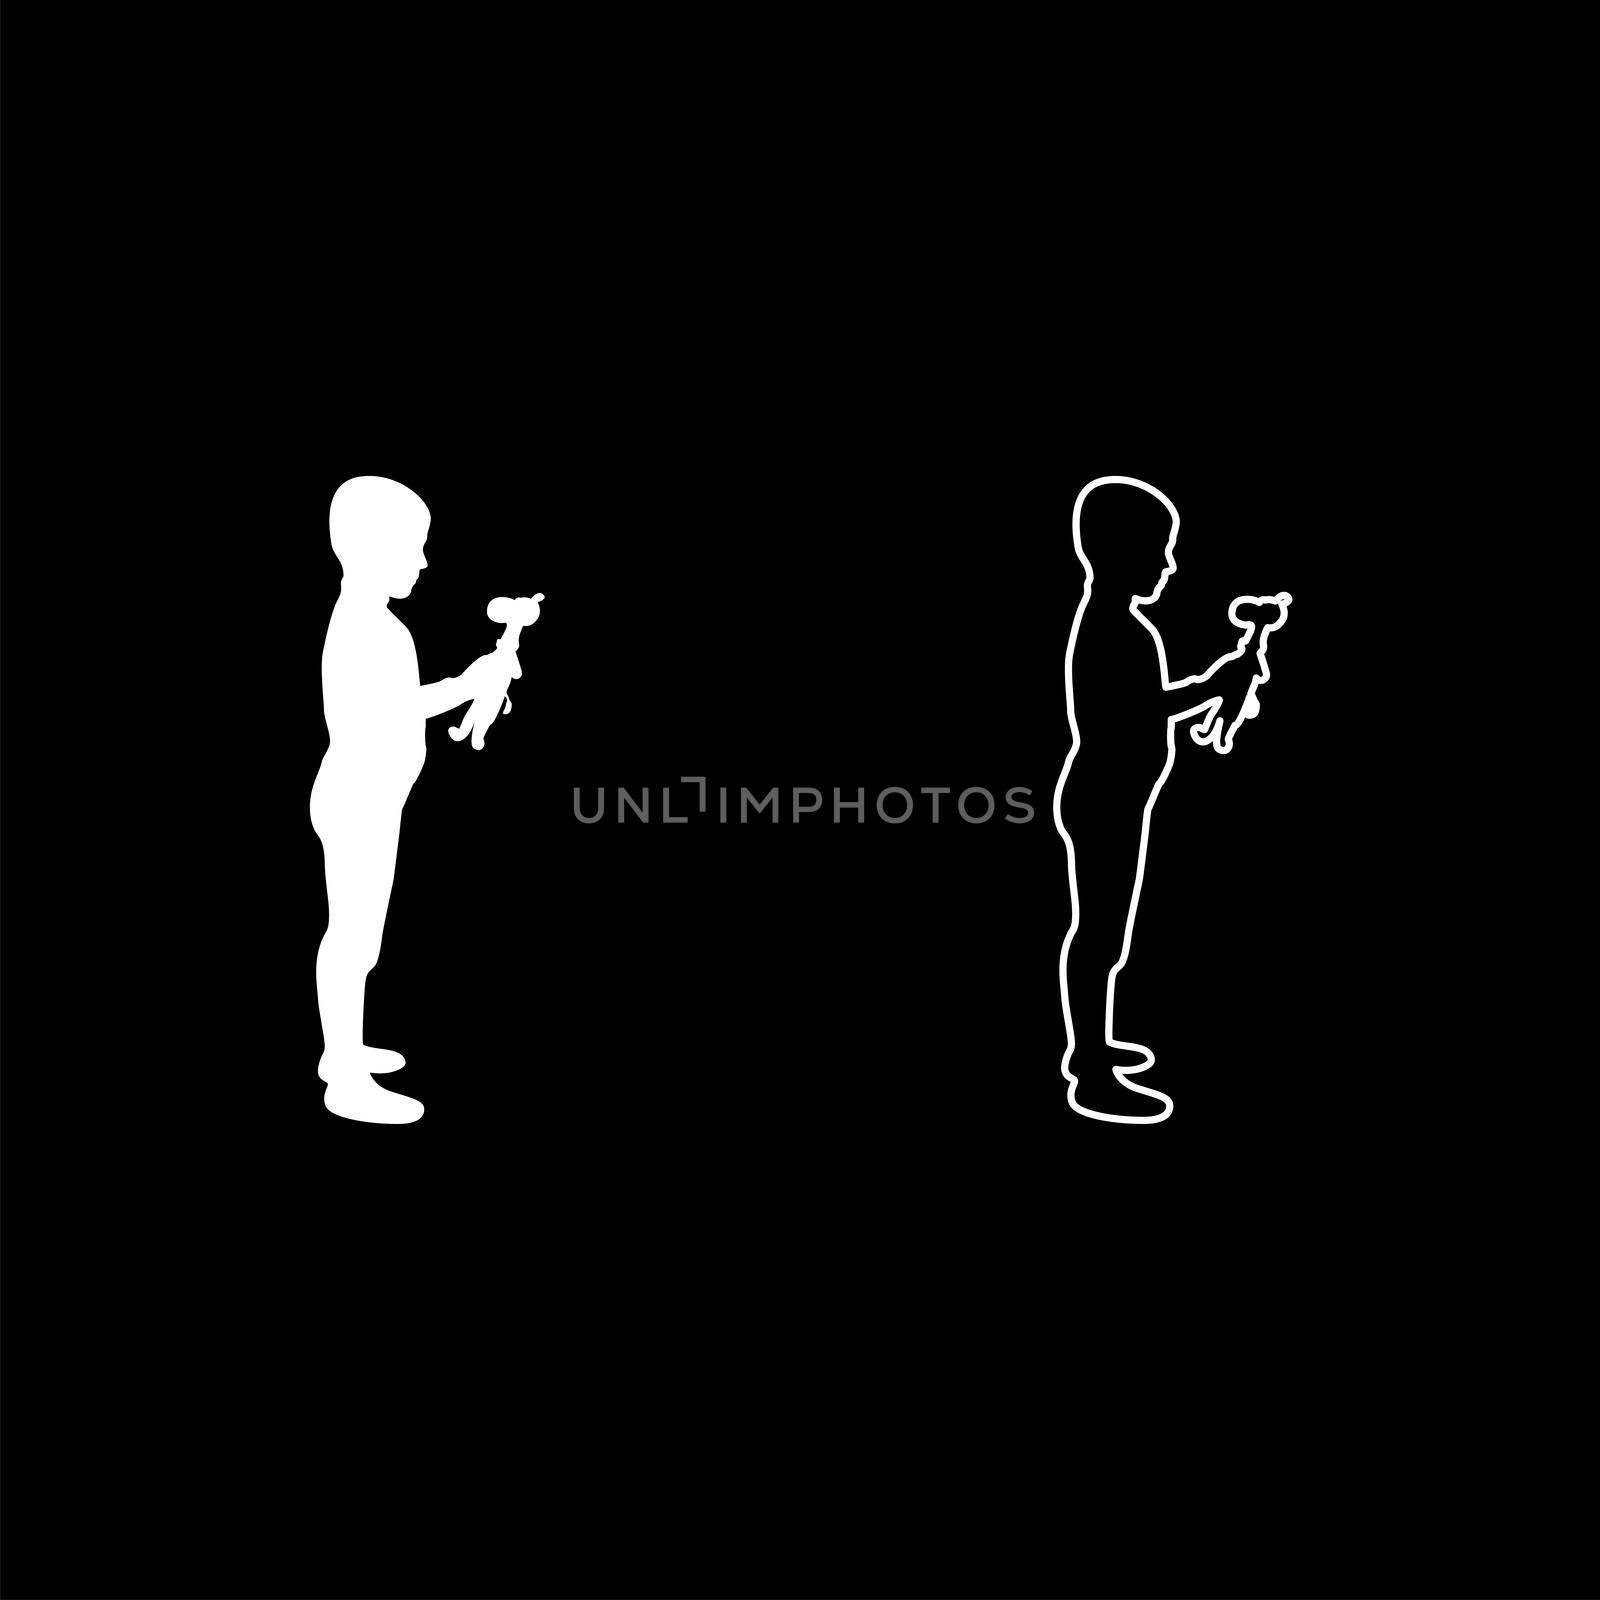 Boy holds toy Child hold giraffe Preschool Brother holding amigurumi Son with gifts Teddy plaything presents friend for children kid silhouette white color vector illustration solid outline style simple image